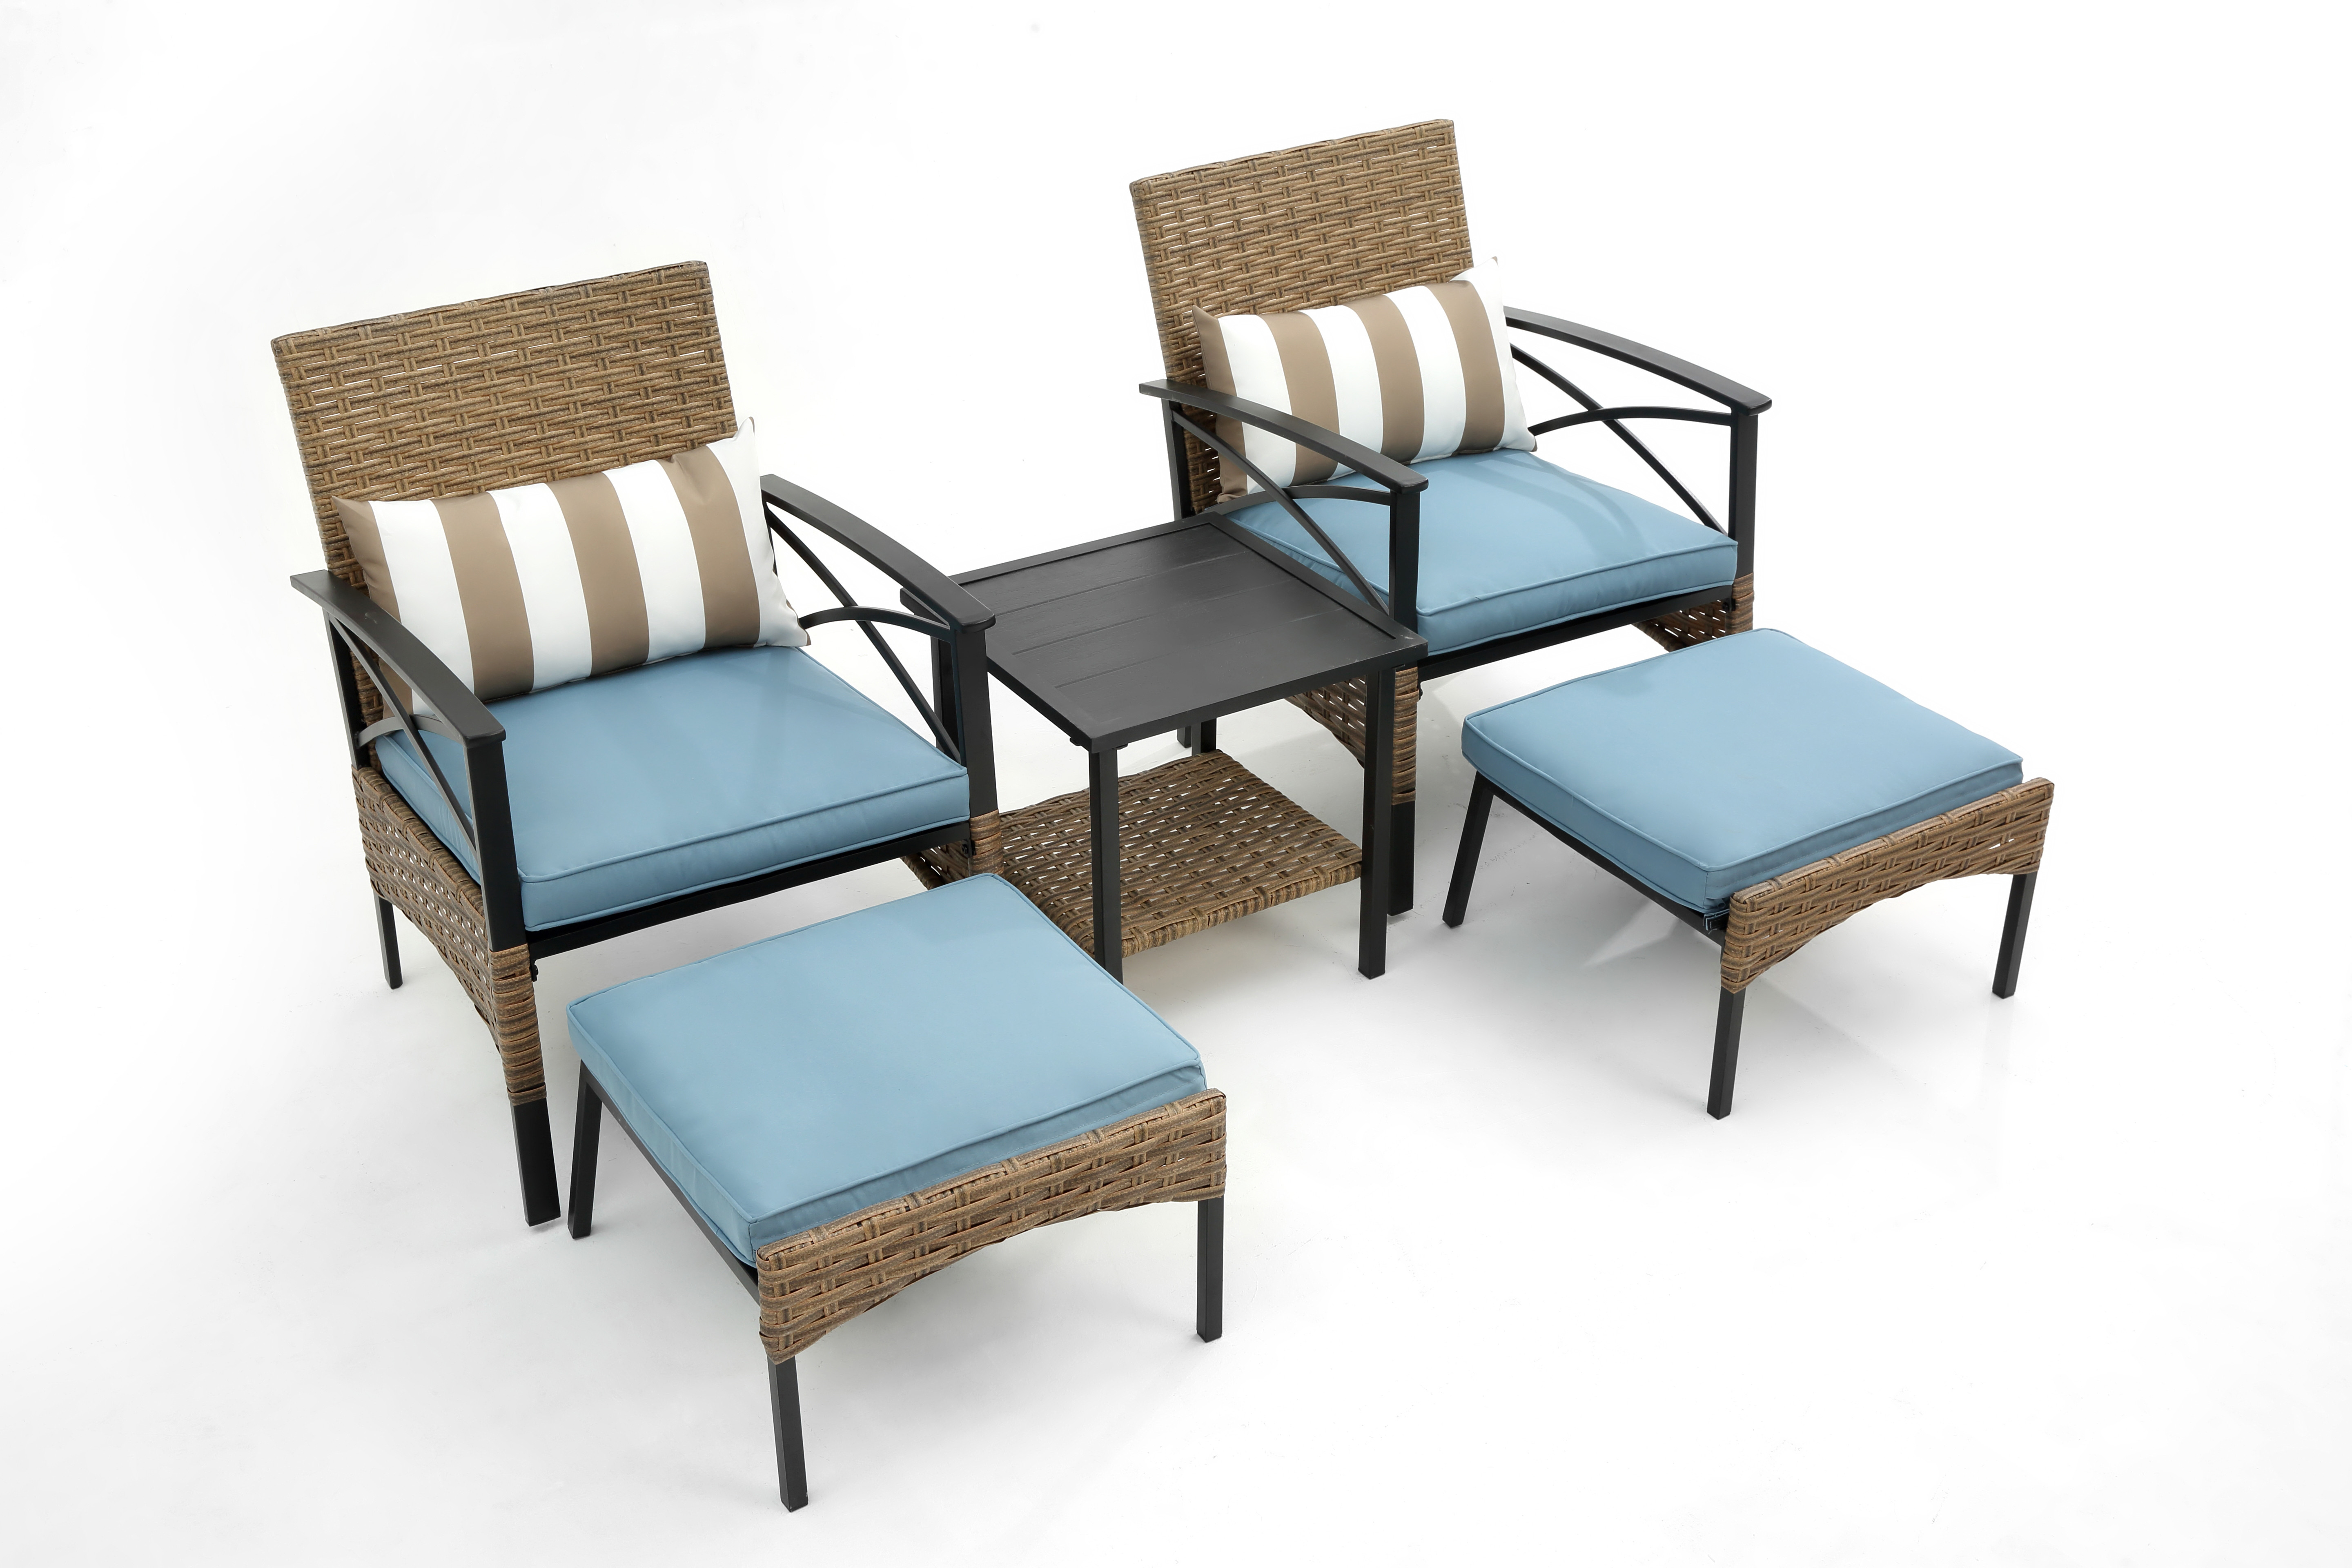 Patio Chairs with Ottomans Set of 2, HSUNNS 5 Piece Balcony Furniture Wicker Patio Chairs with Side Table Set, Cushioned Outdoor Lounge Chair in Black Metal Frame, Blue Remove Cushions - image 2 of 12